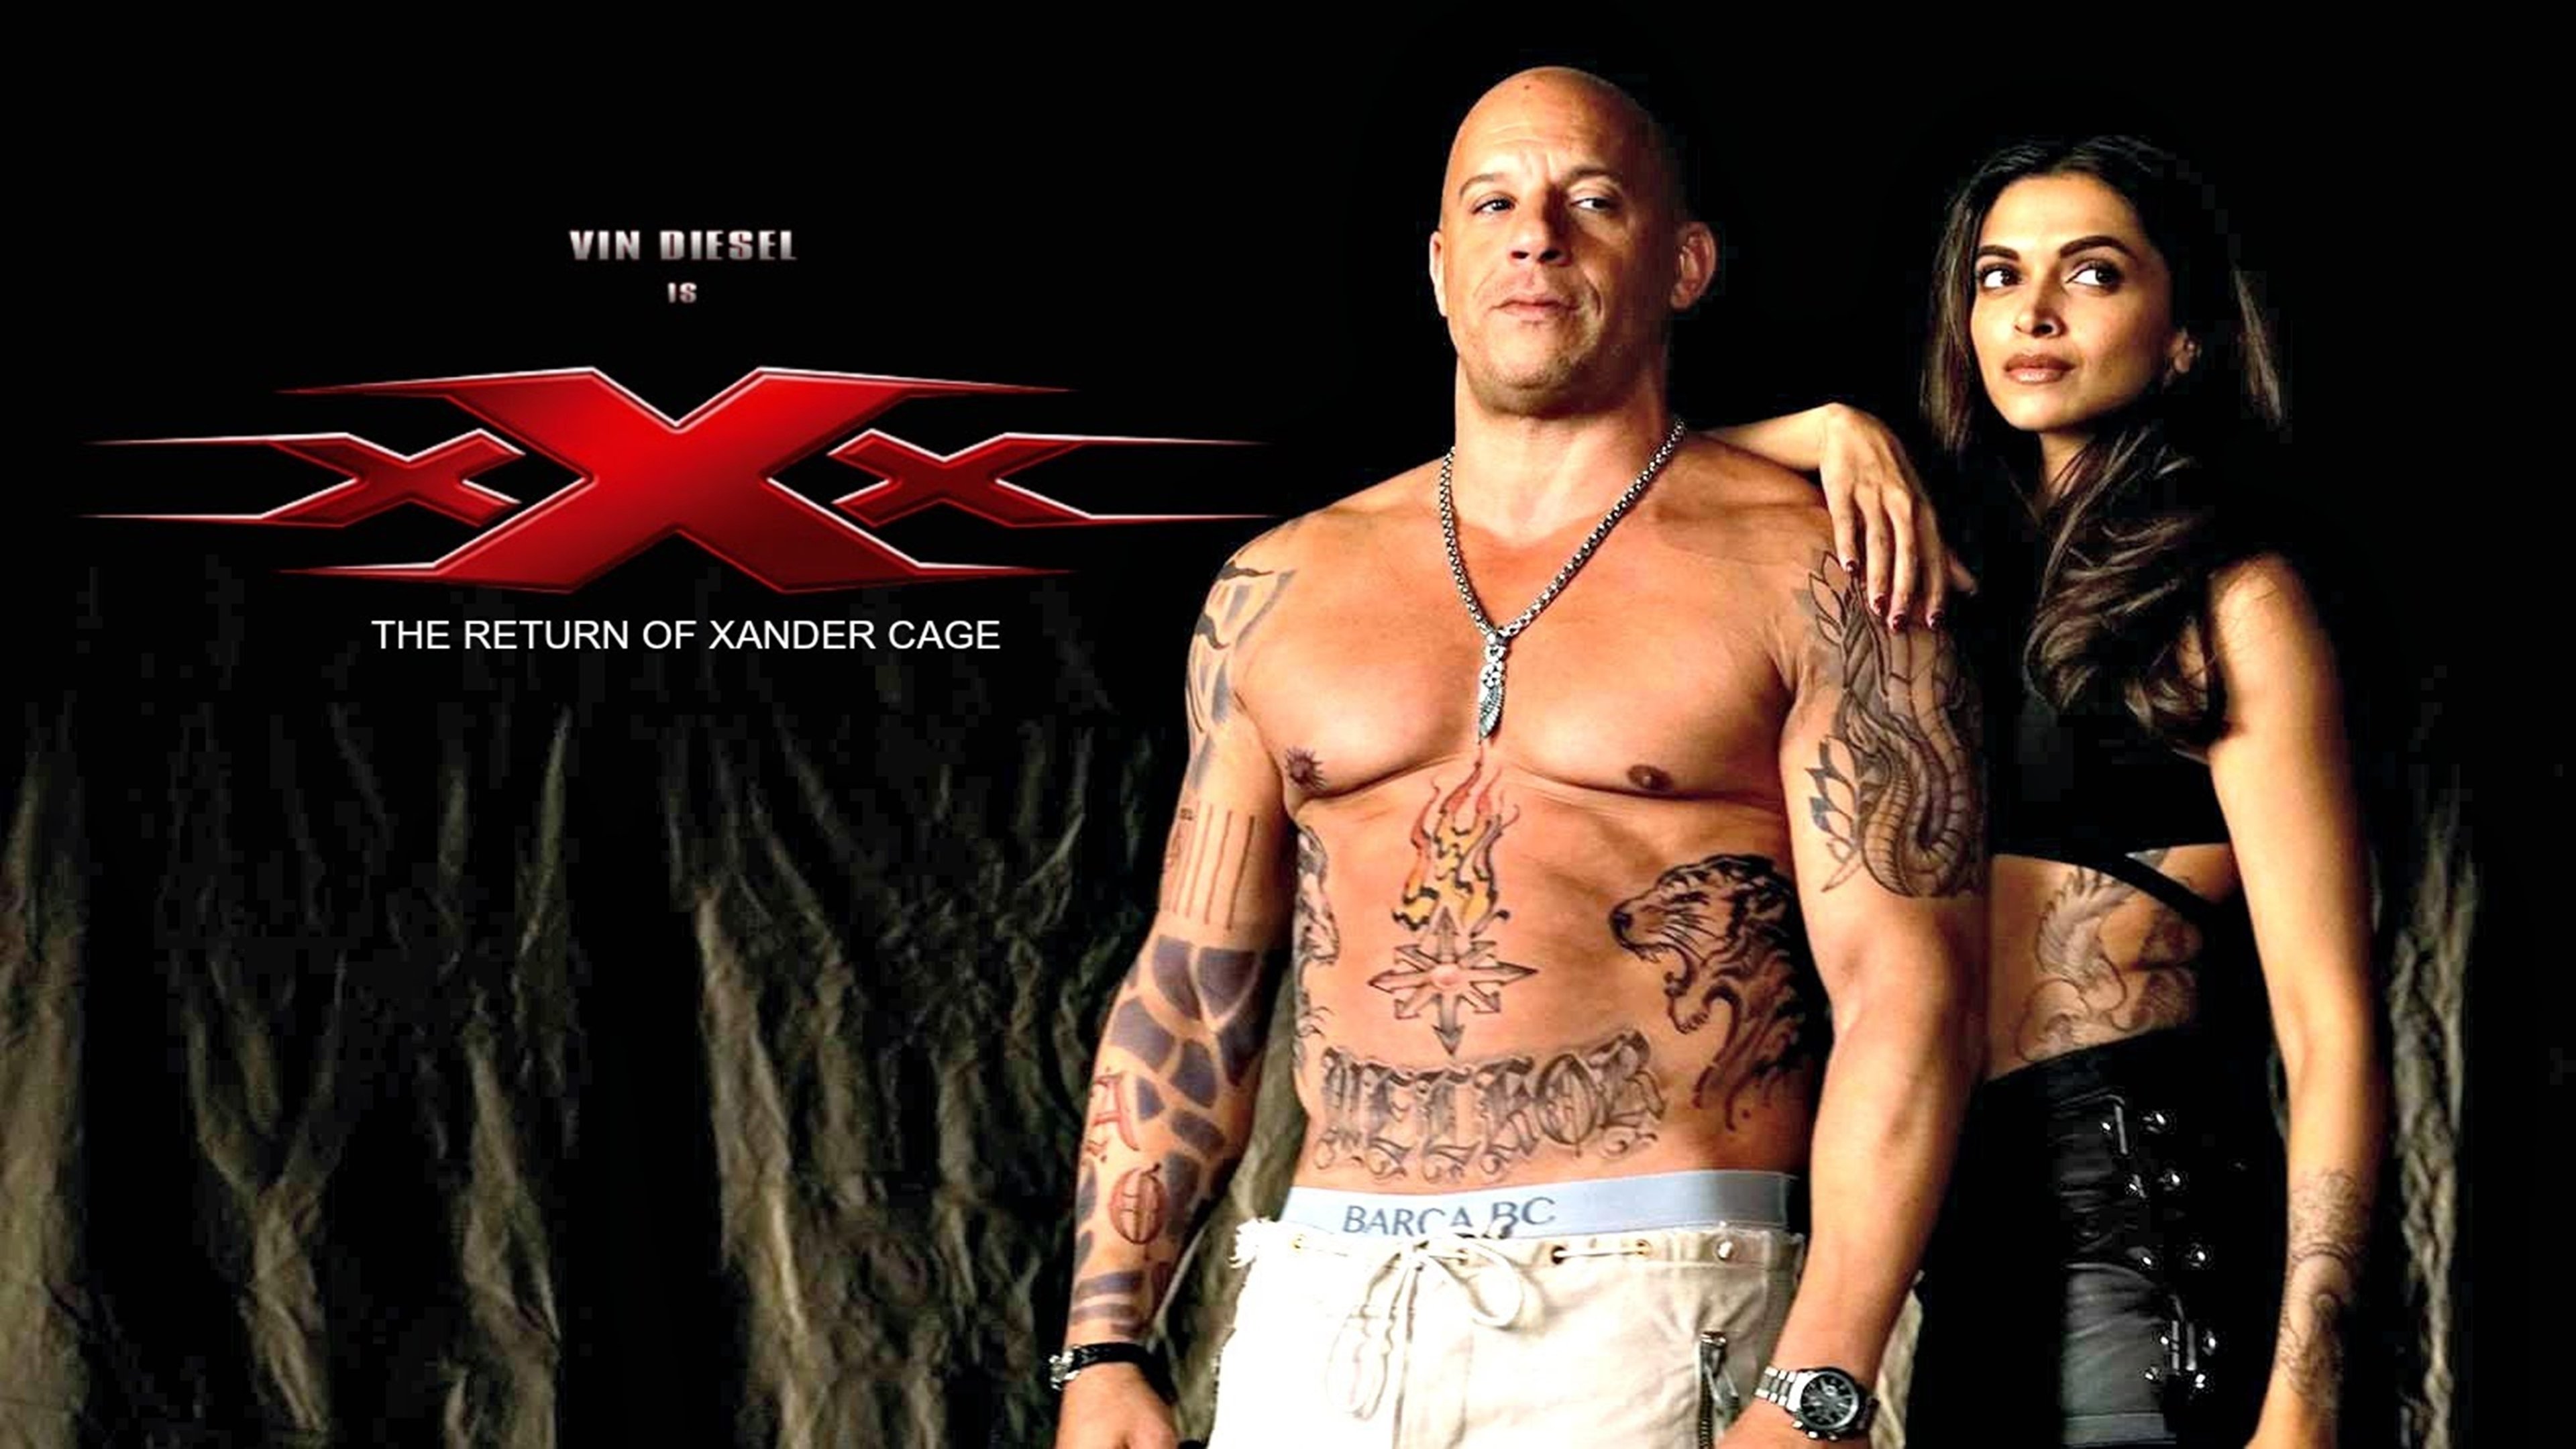 Xxx The Return Of Xander Cage Vin Diesel To Visit India Quirkybyte